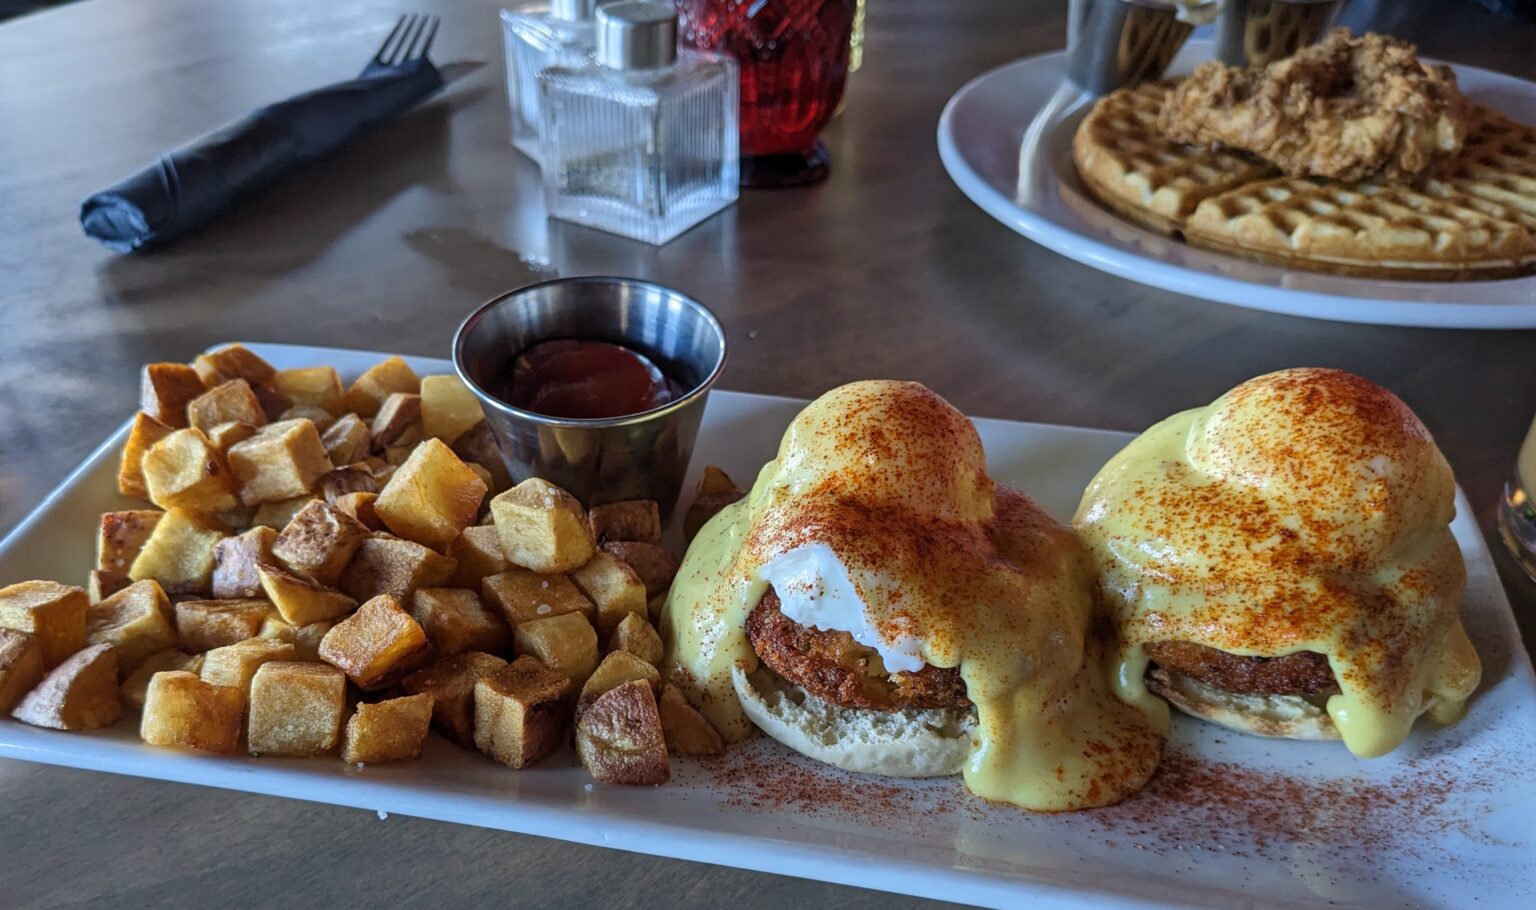 The Dungeness crab cake Benedict served at The Black Cat's Sunday brunch is worth a visit on its own. The hollandaise sauce may seem light at first